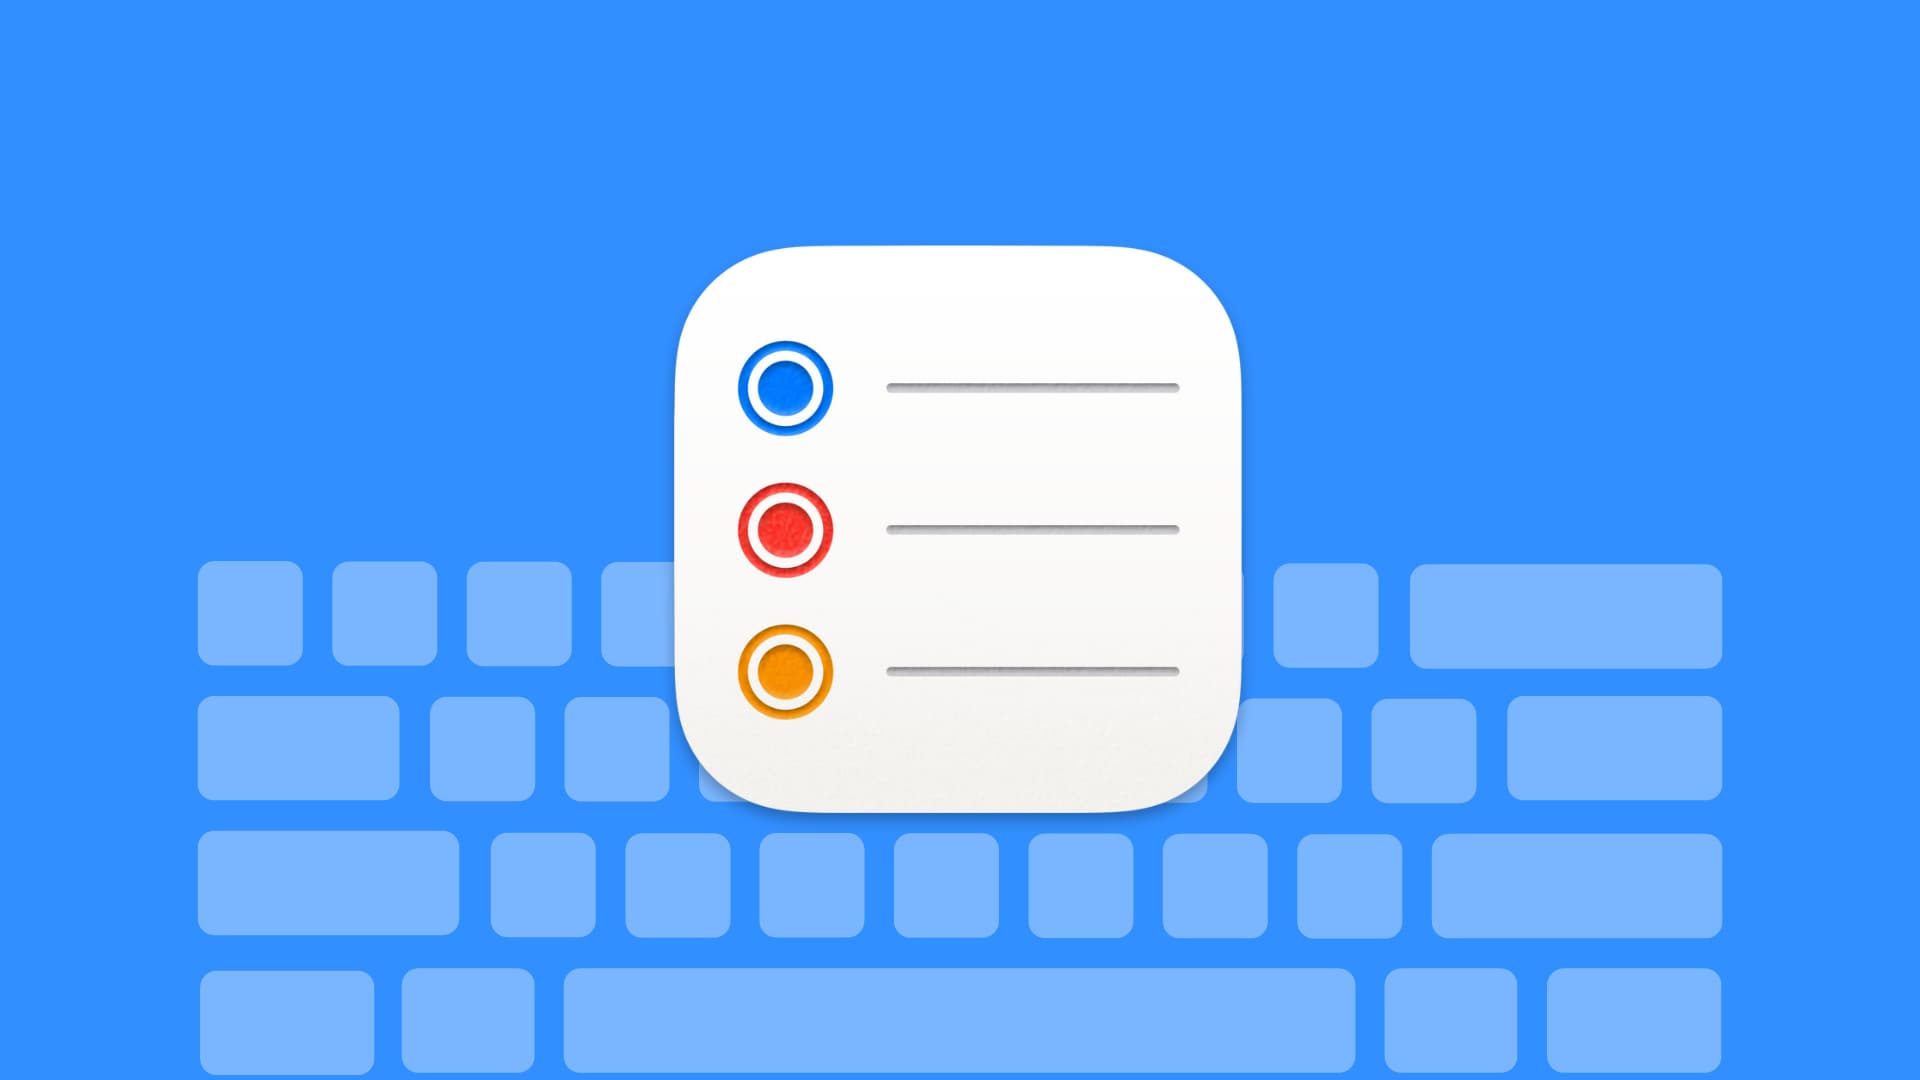 Keyboard shortcuts for Reminders app